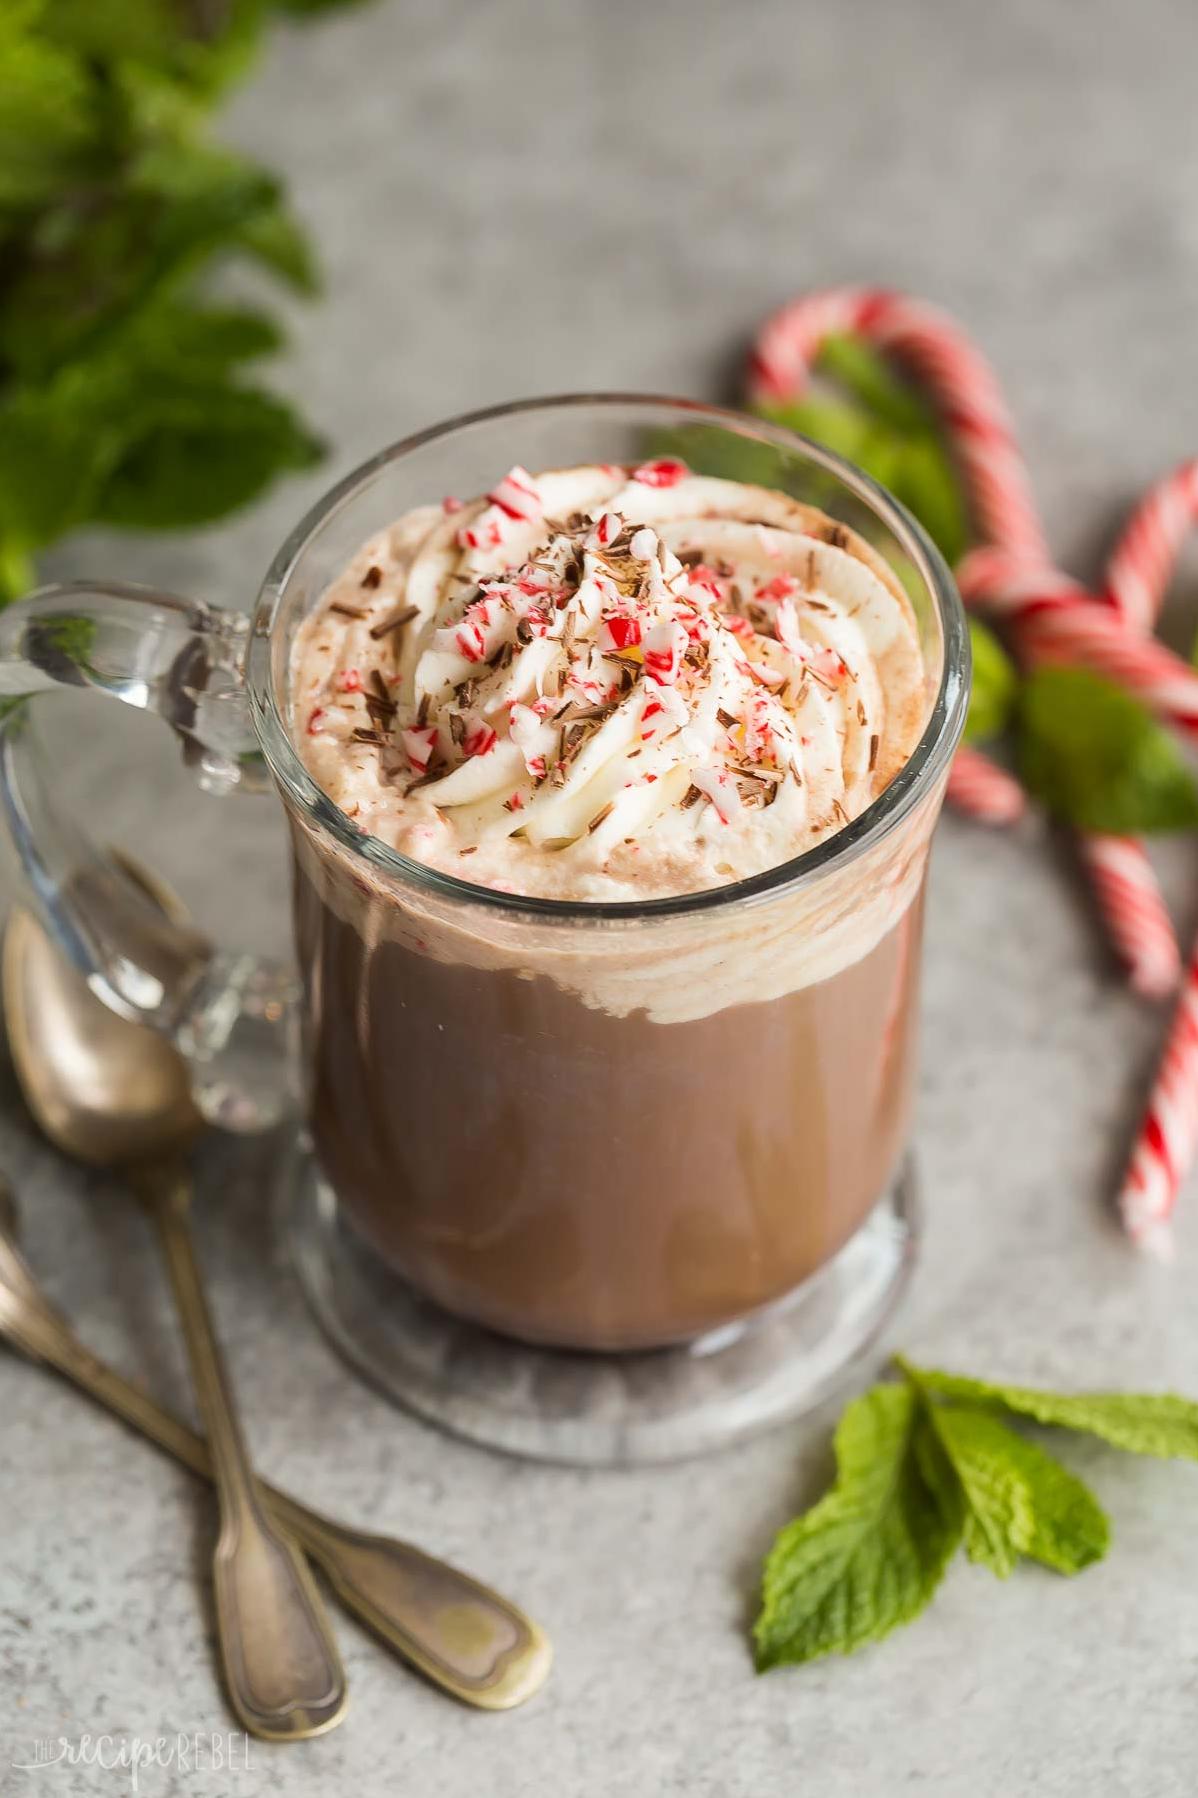  Treat yourself to a cozy cup of holiday goodness with our Peppermint Mocha Mix recipe. 🎄🍫